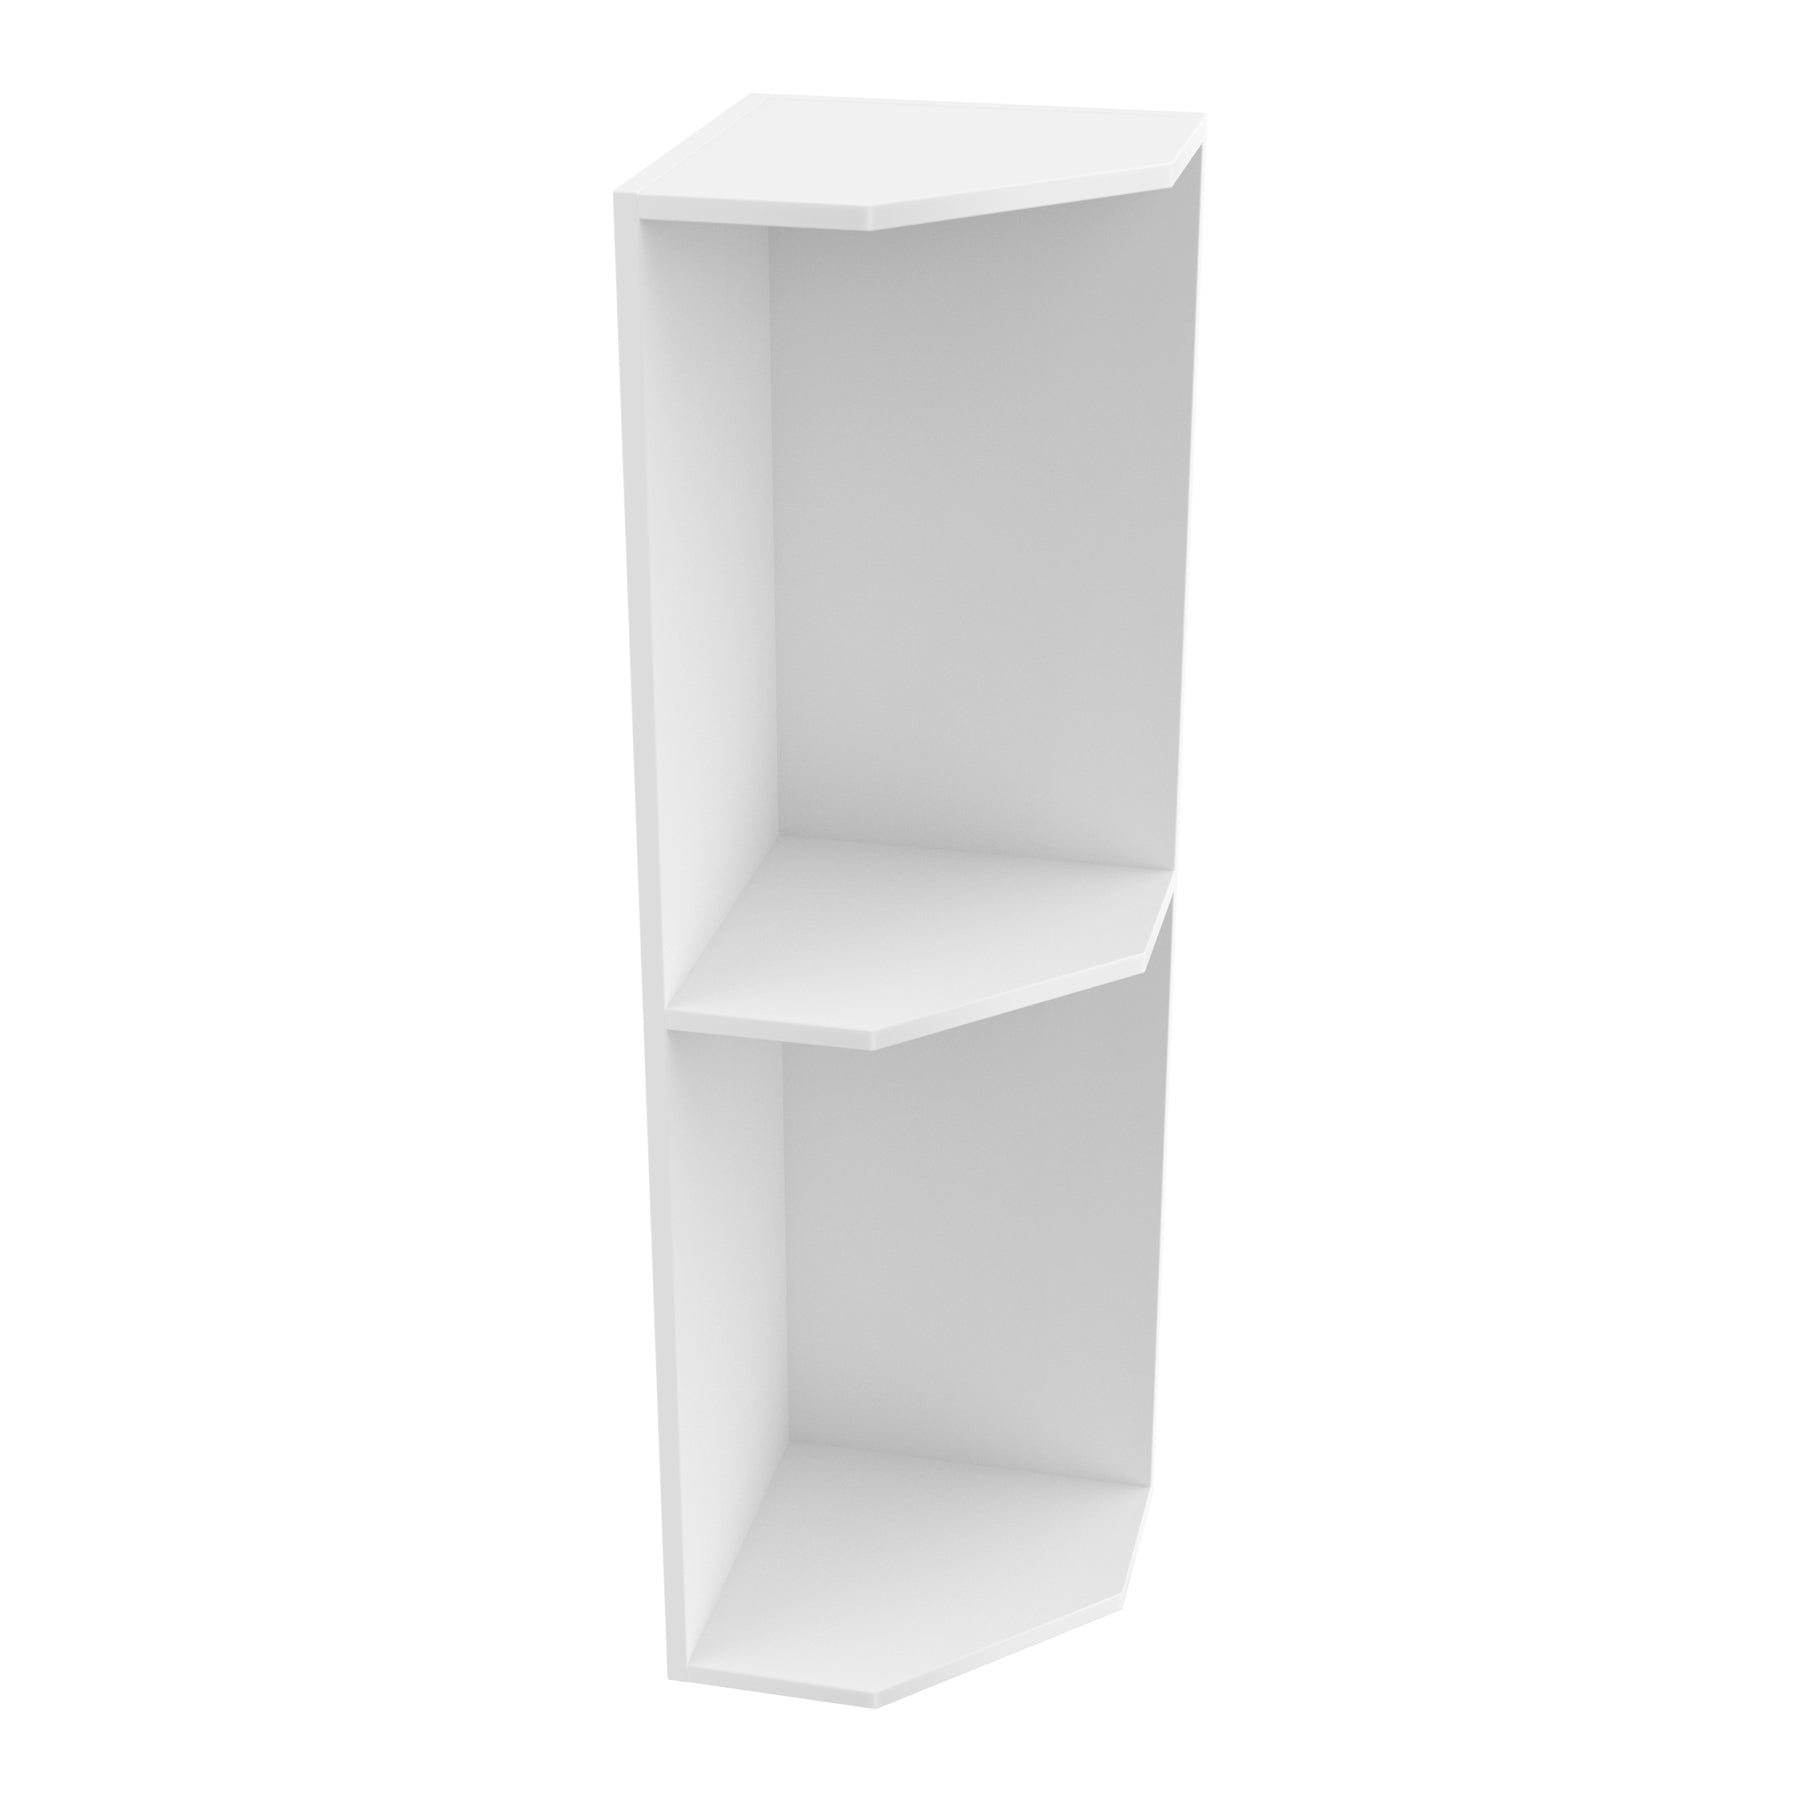 Wall Cabinet - RTA - Lacquer White - End Wall Shelf Cabinet | 12"W x 42"H x 12"D